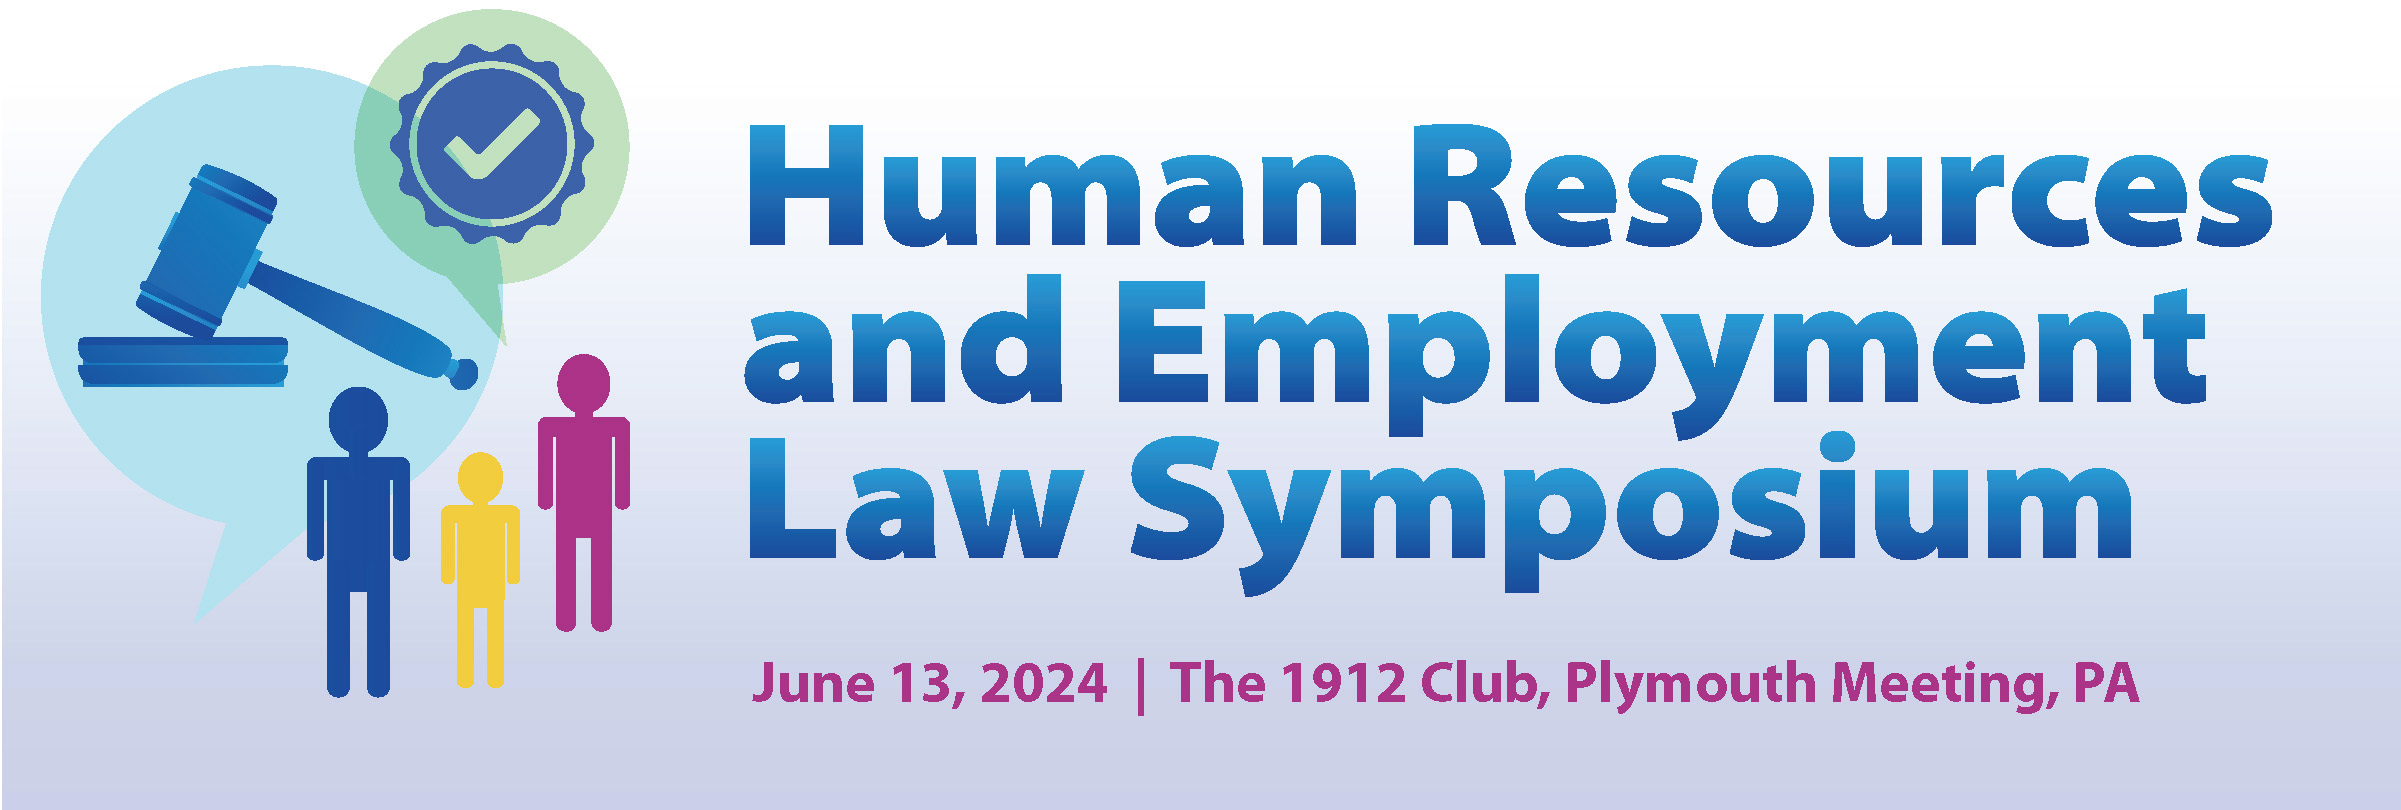 Human Resources and Employment Law Symposium